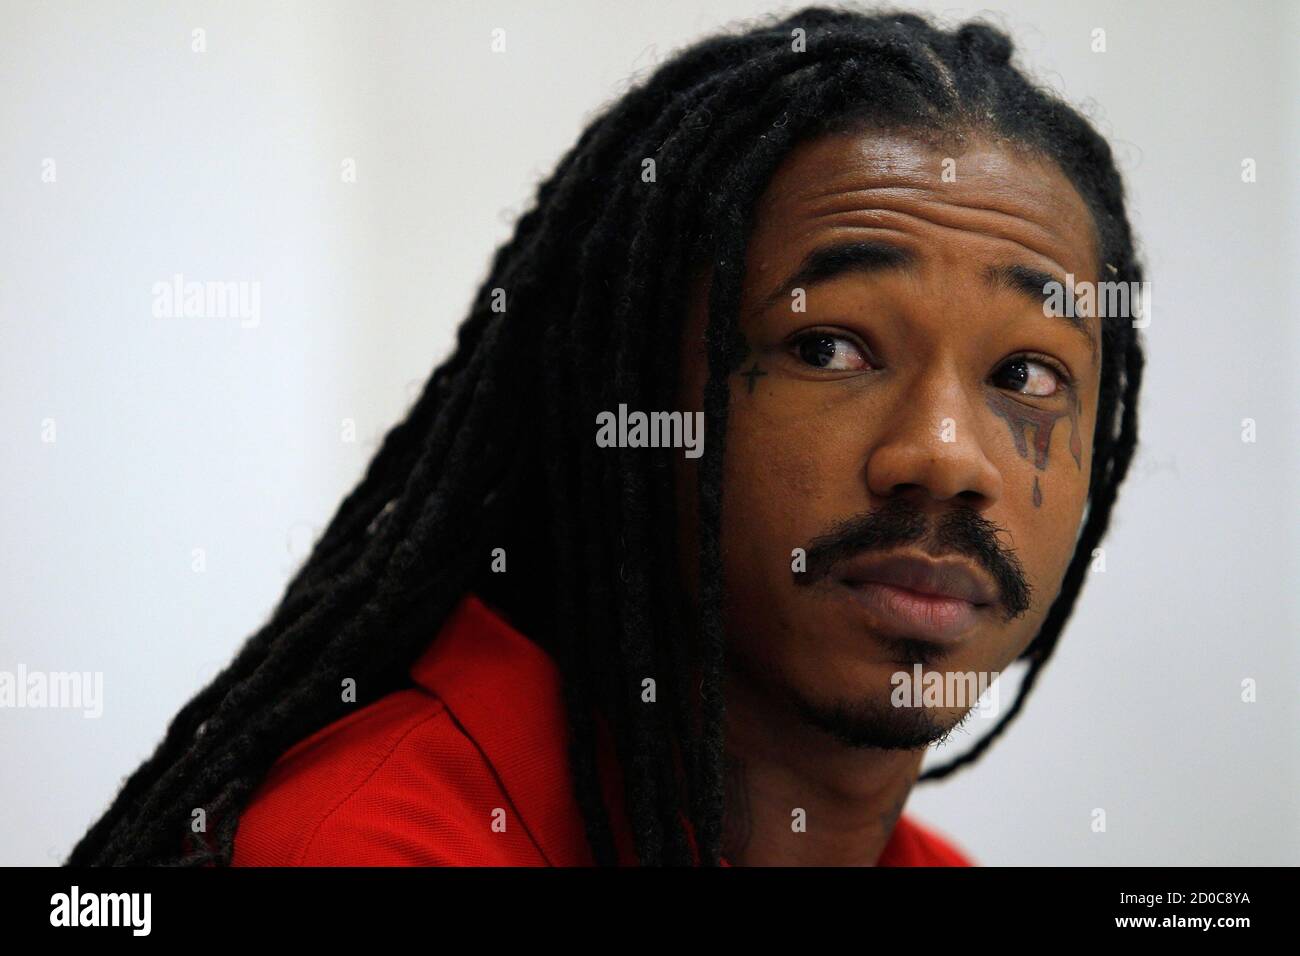 Former Bloods gang member Jiwe Morris attends a news conference at the World Meeting of Human Values and Culture of Lawfulness in Monterrey September 8, 2011. The topic of this year's meeting is non-violence. REUTERS/Tomas Bravo (MEXICO - Tags: SOCIETY) Stock Photo